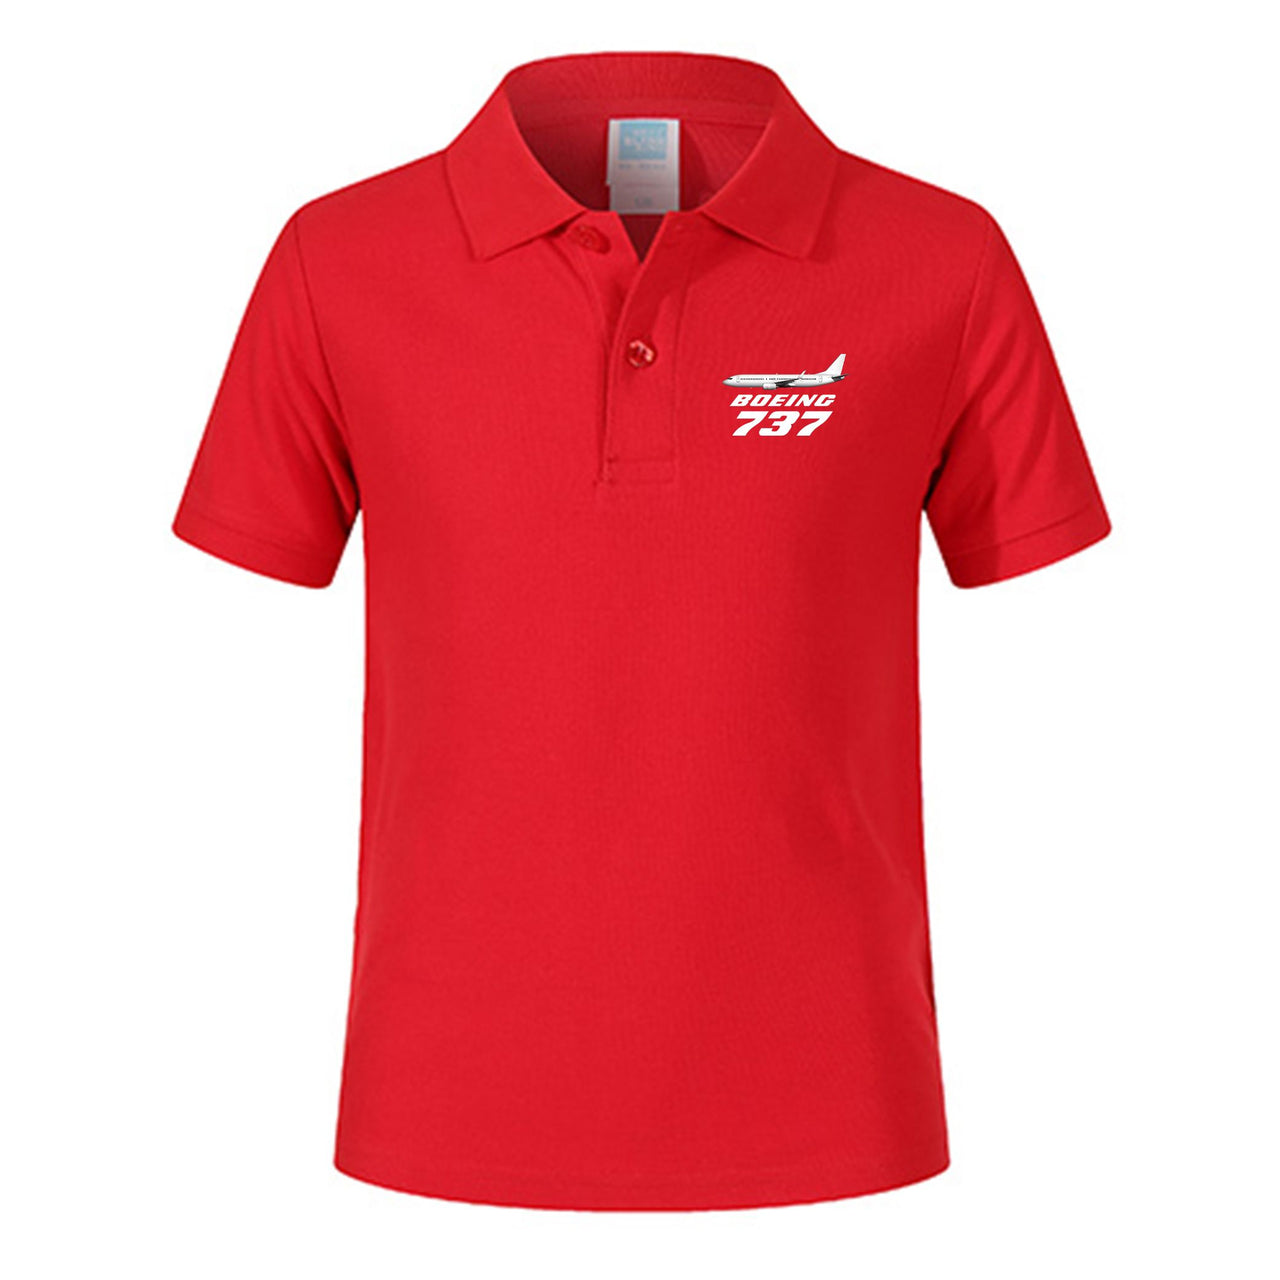 The Boeing 737 Designed Children Polo T-Shirts